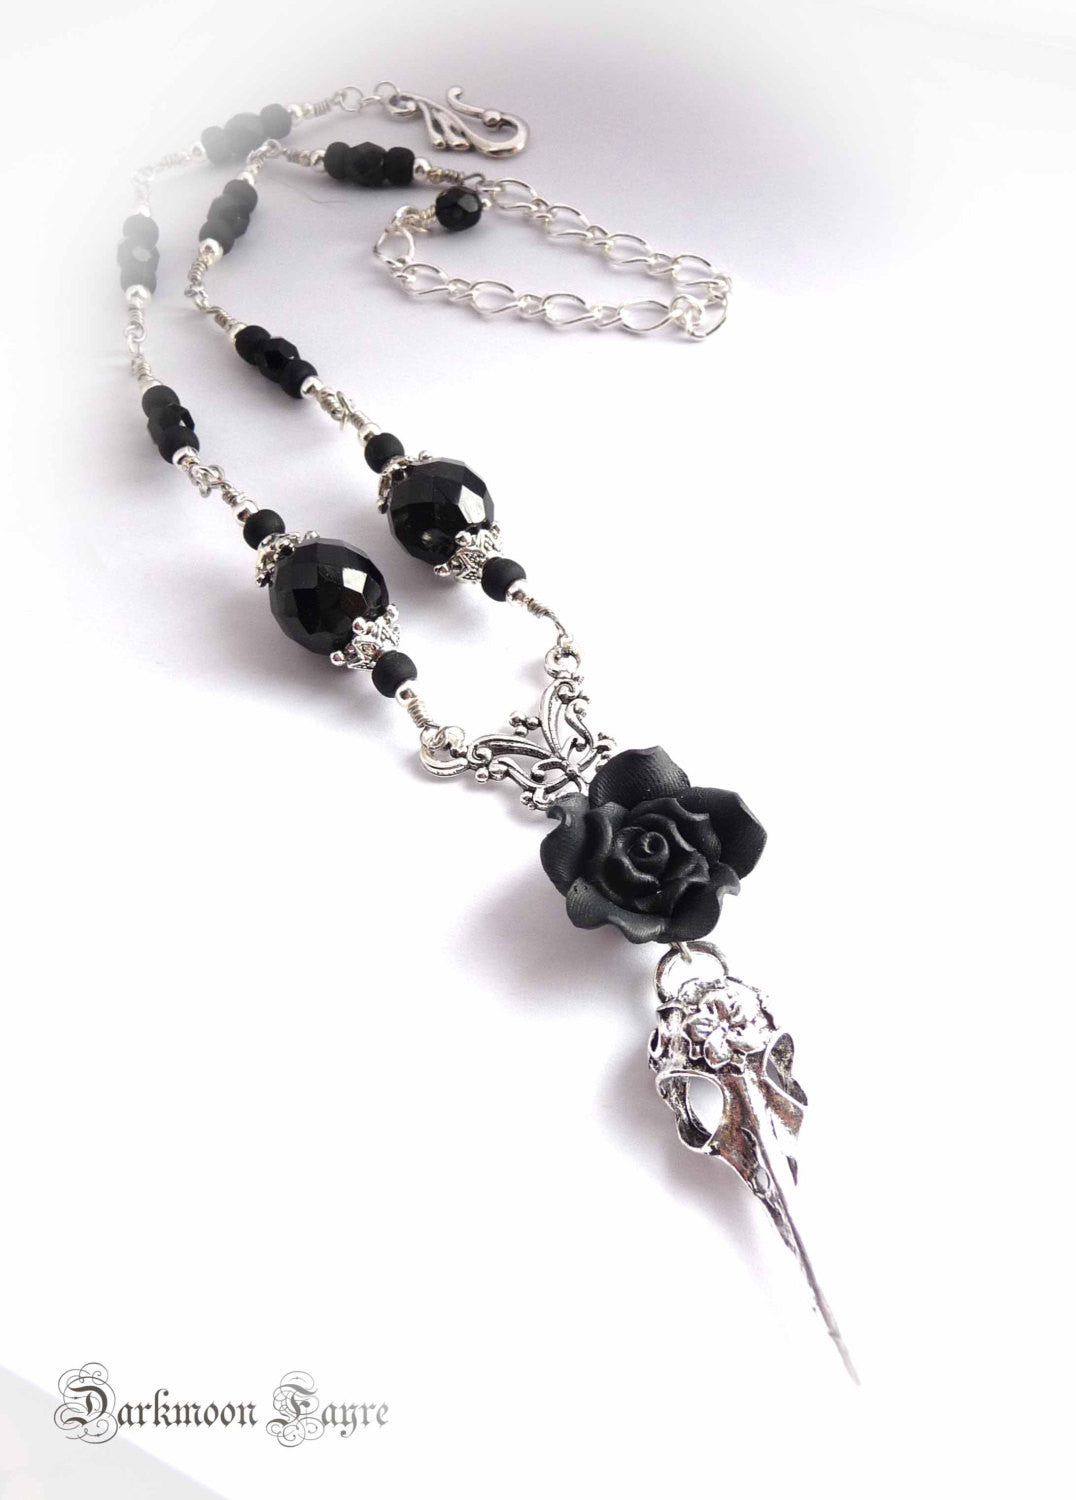 ***Black Rose & Tattooed Silver Bird Skull Rosary Necklace/ Choker. Jet Black Faceted Vintage, Fire Polished and Matte Black Glass Beads - Darkmoon Fayre